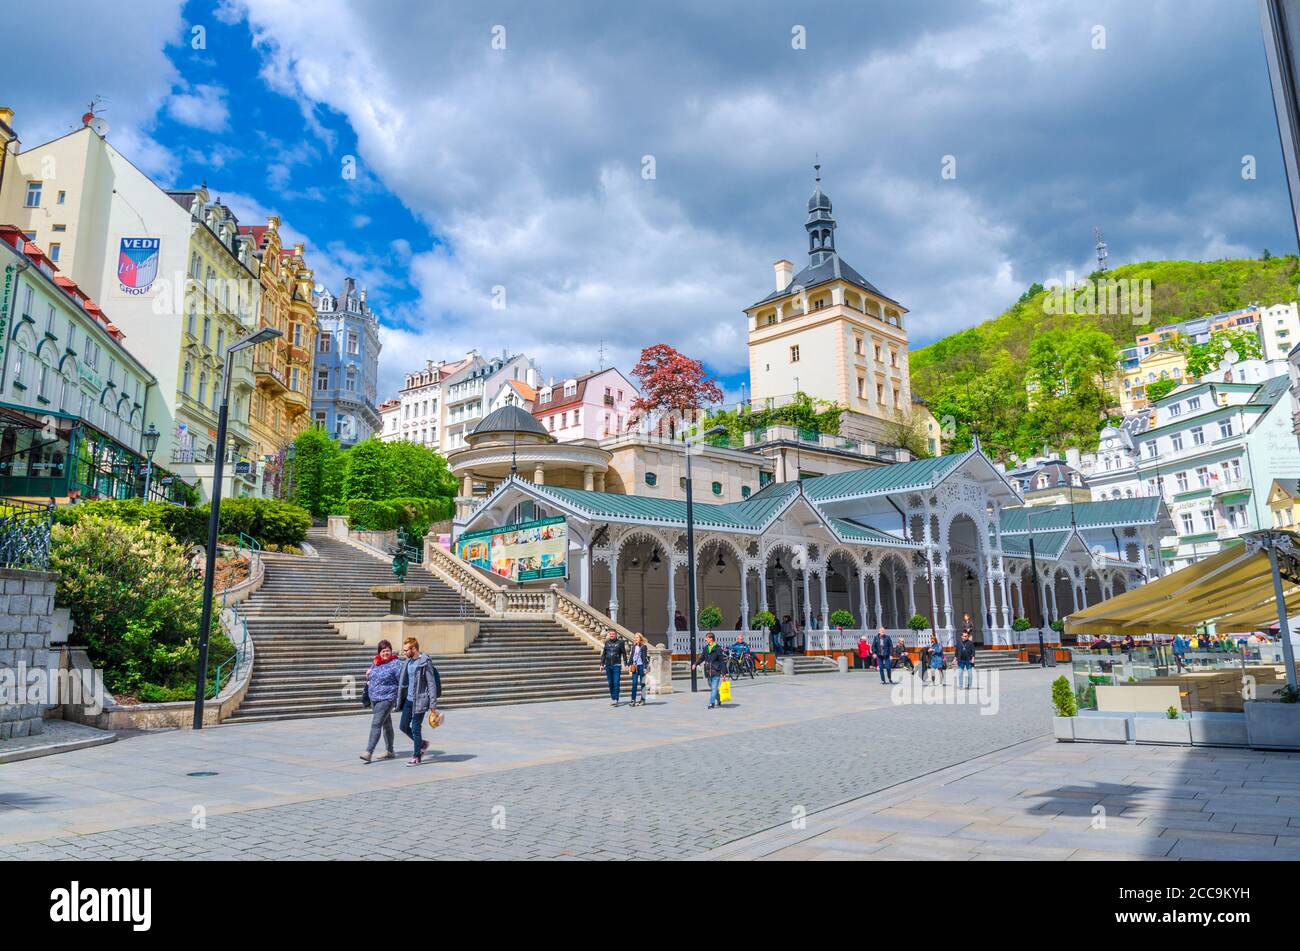 Karlovy Vary, Czech Republic, May 10, 2019: The Market Colonnade Trzni kolonada wooden colonnade with hot springs and people are walking in town Carlsbad historical city centre, West Bohemia Stock Photo